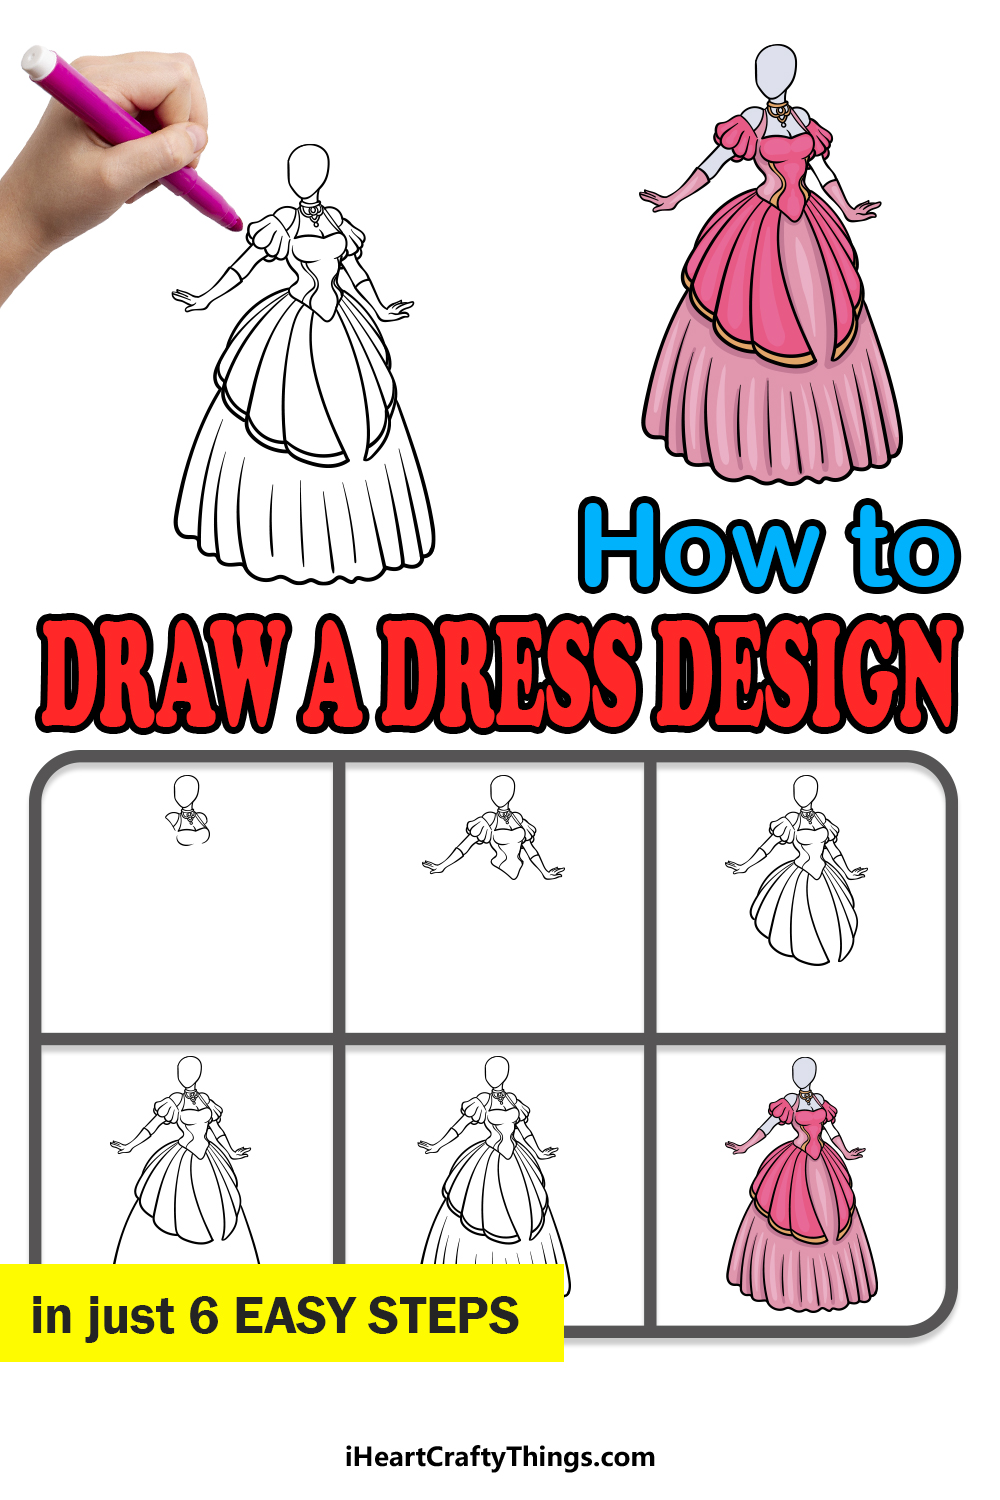 how to draw a Dress Design in 6 easy steps